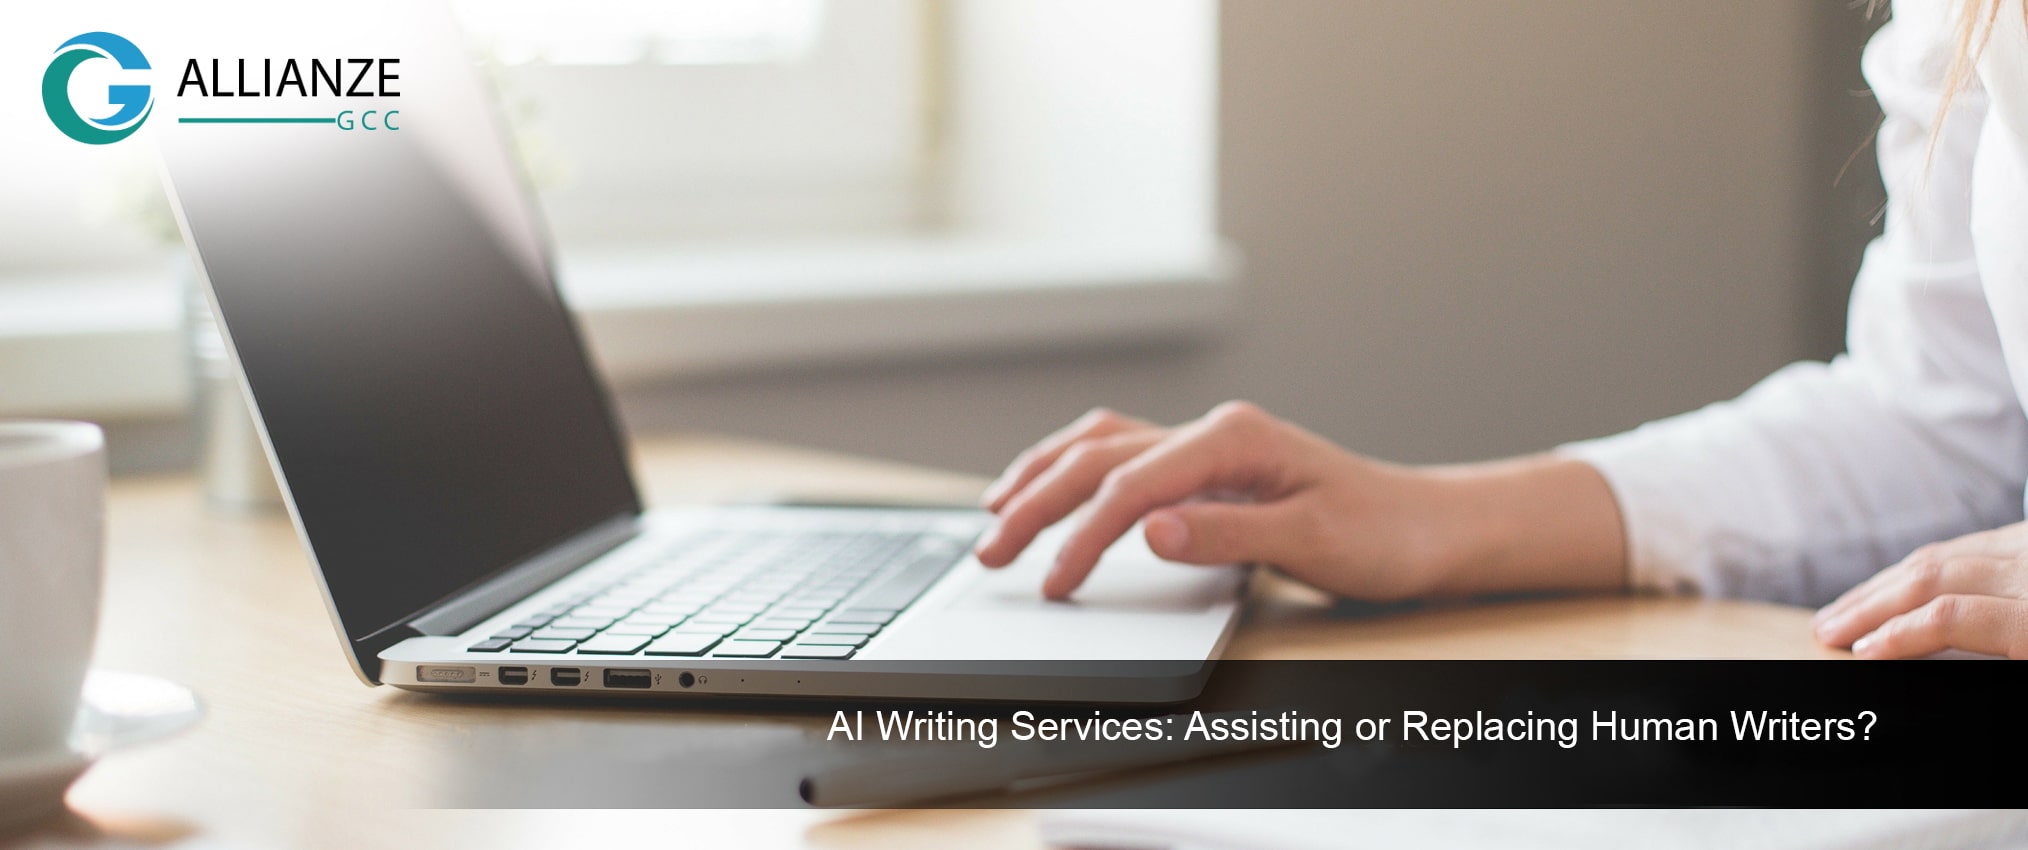 AI Writing Services: Assisting or Replacing Human Writers?